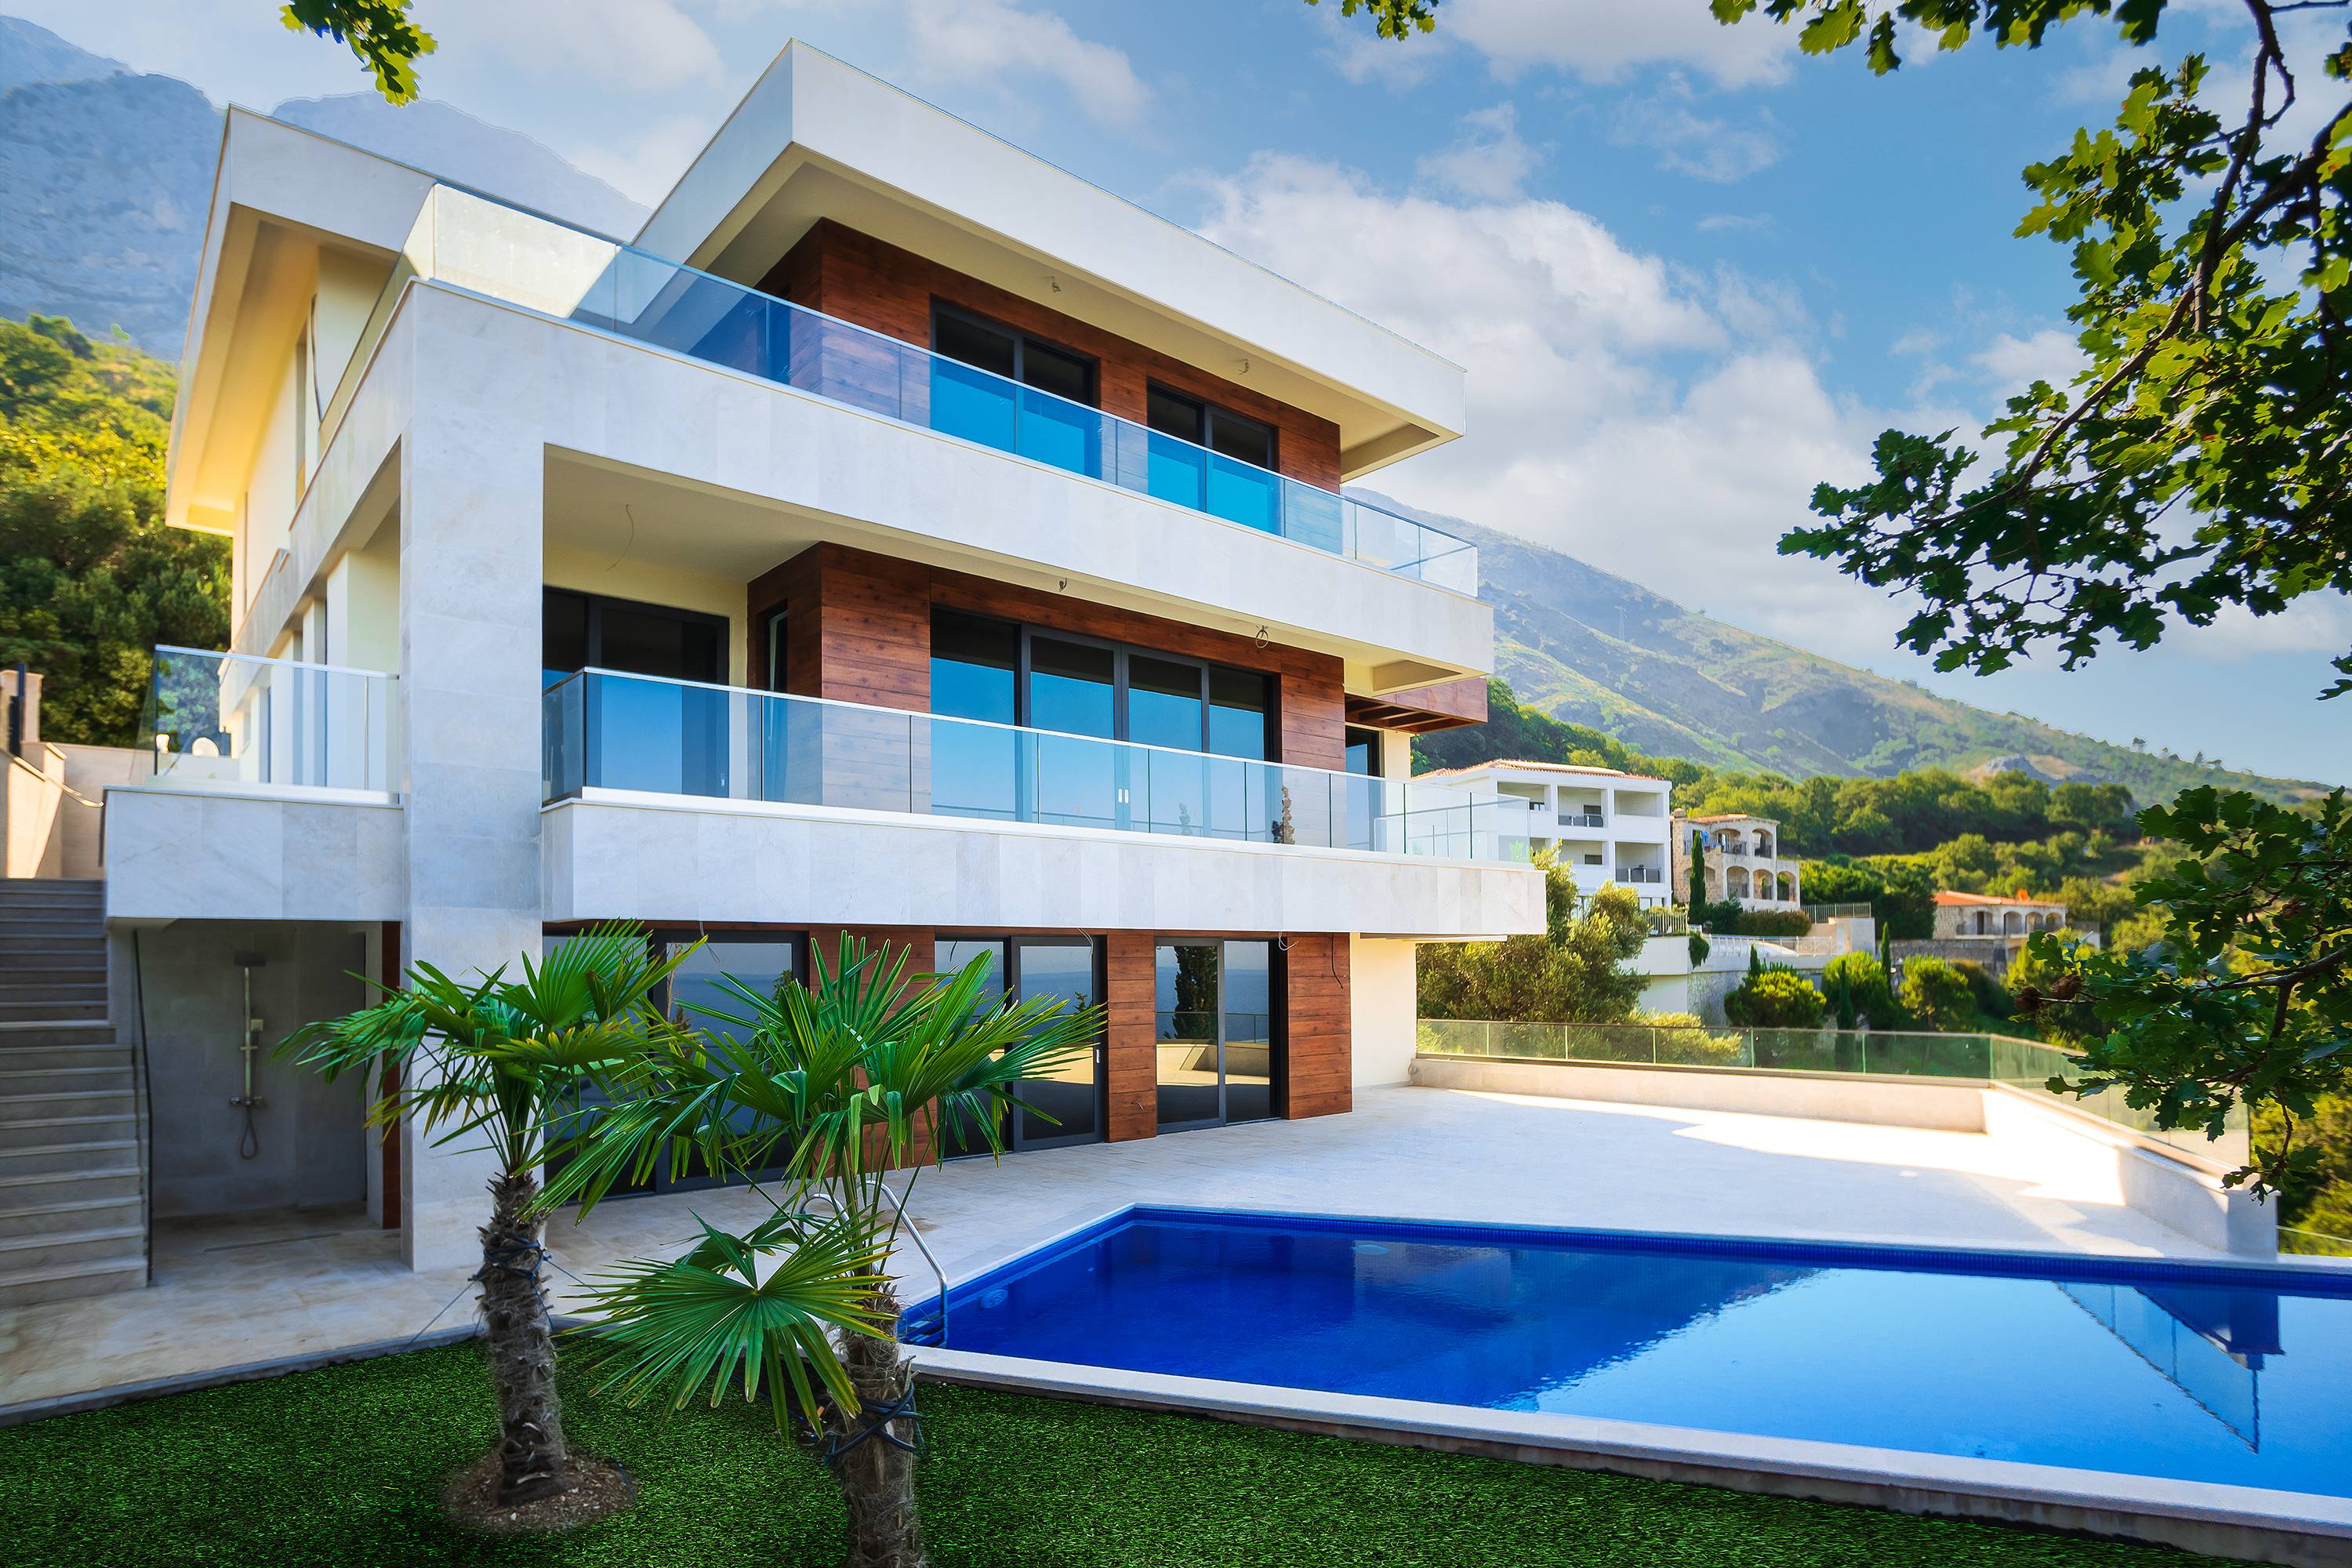 MAJESTICALLY RENOVATED VILLA WALKING DISTANCE TO THE BEST BEACH IN MONTENEGRO